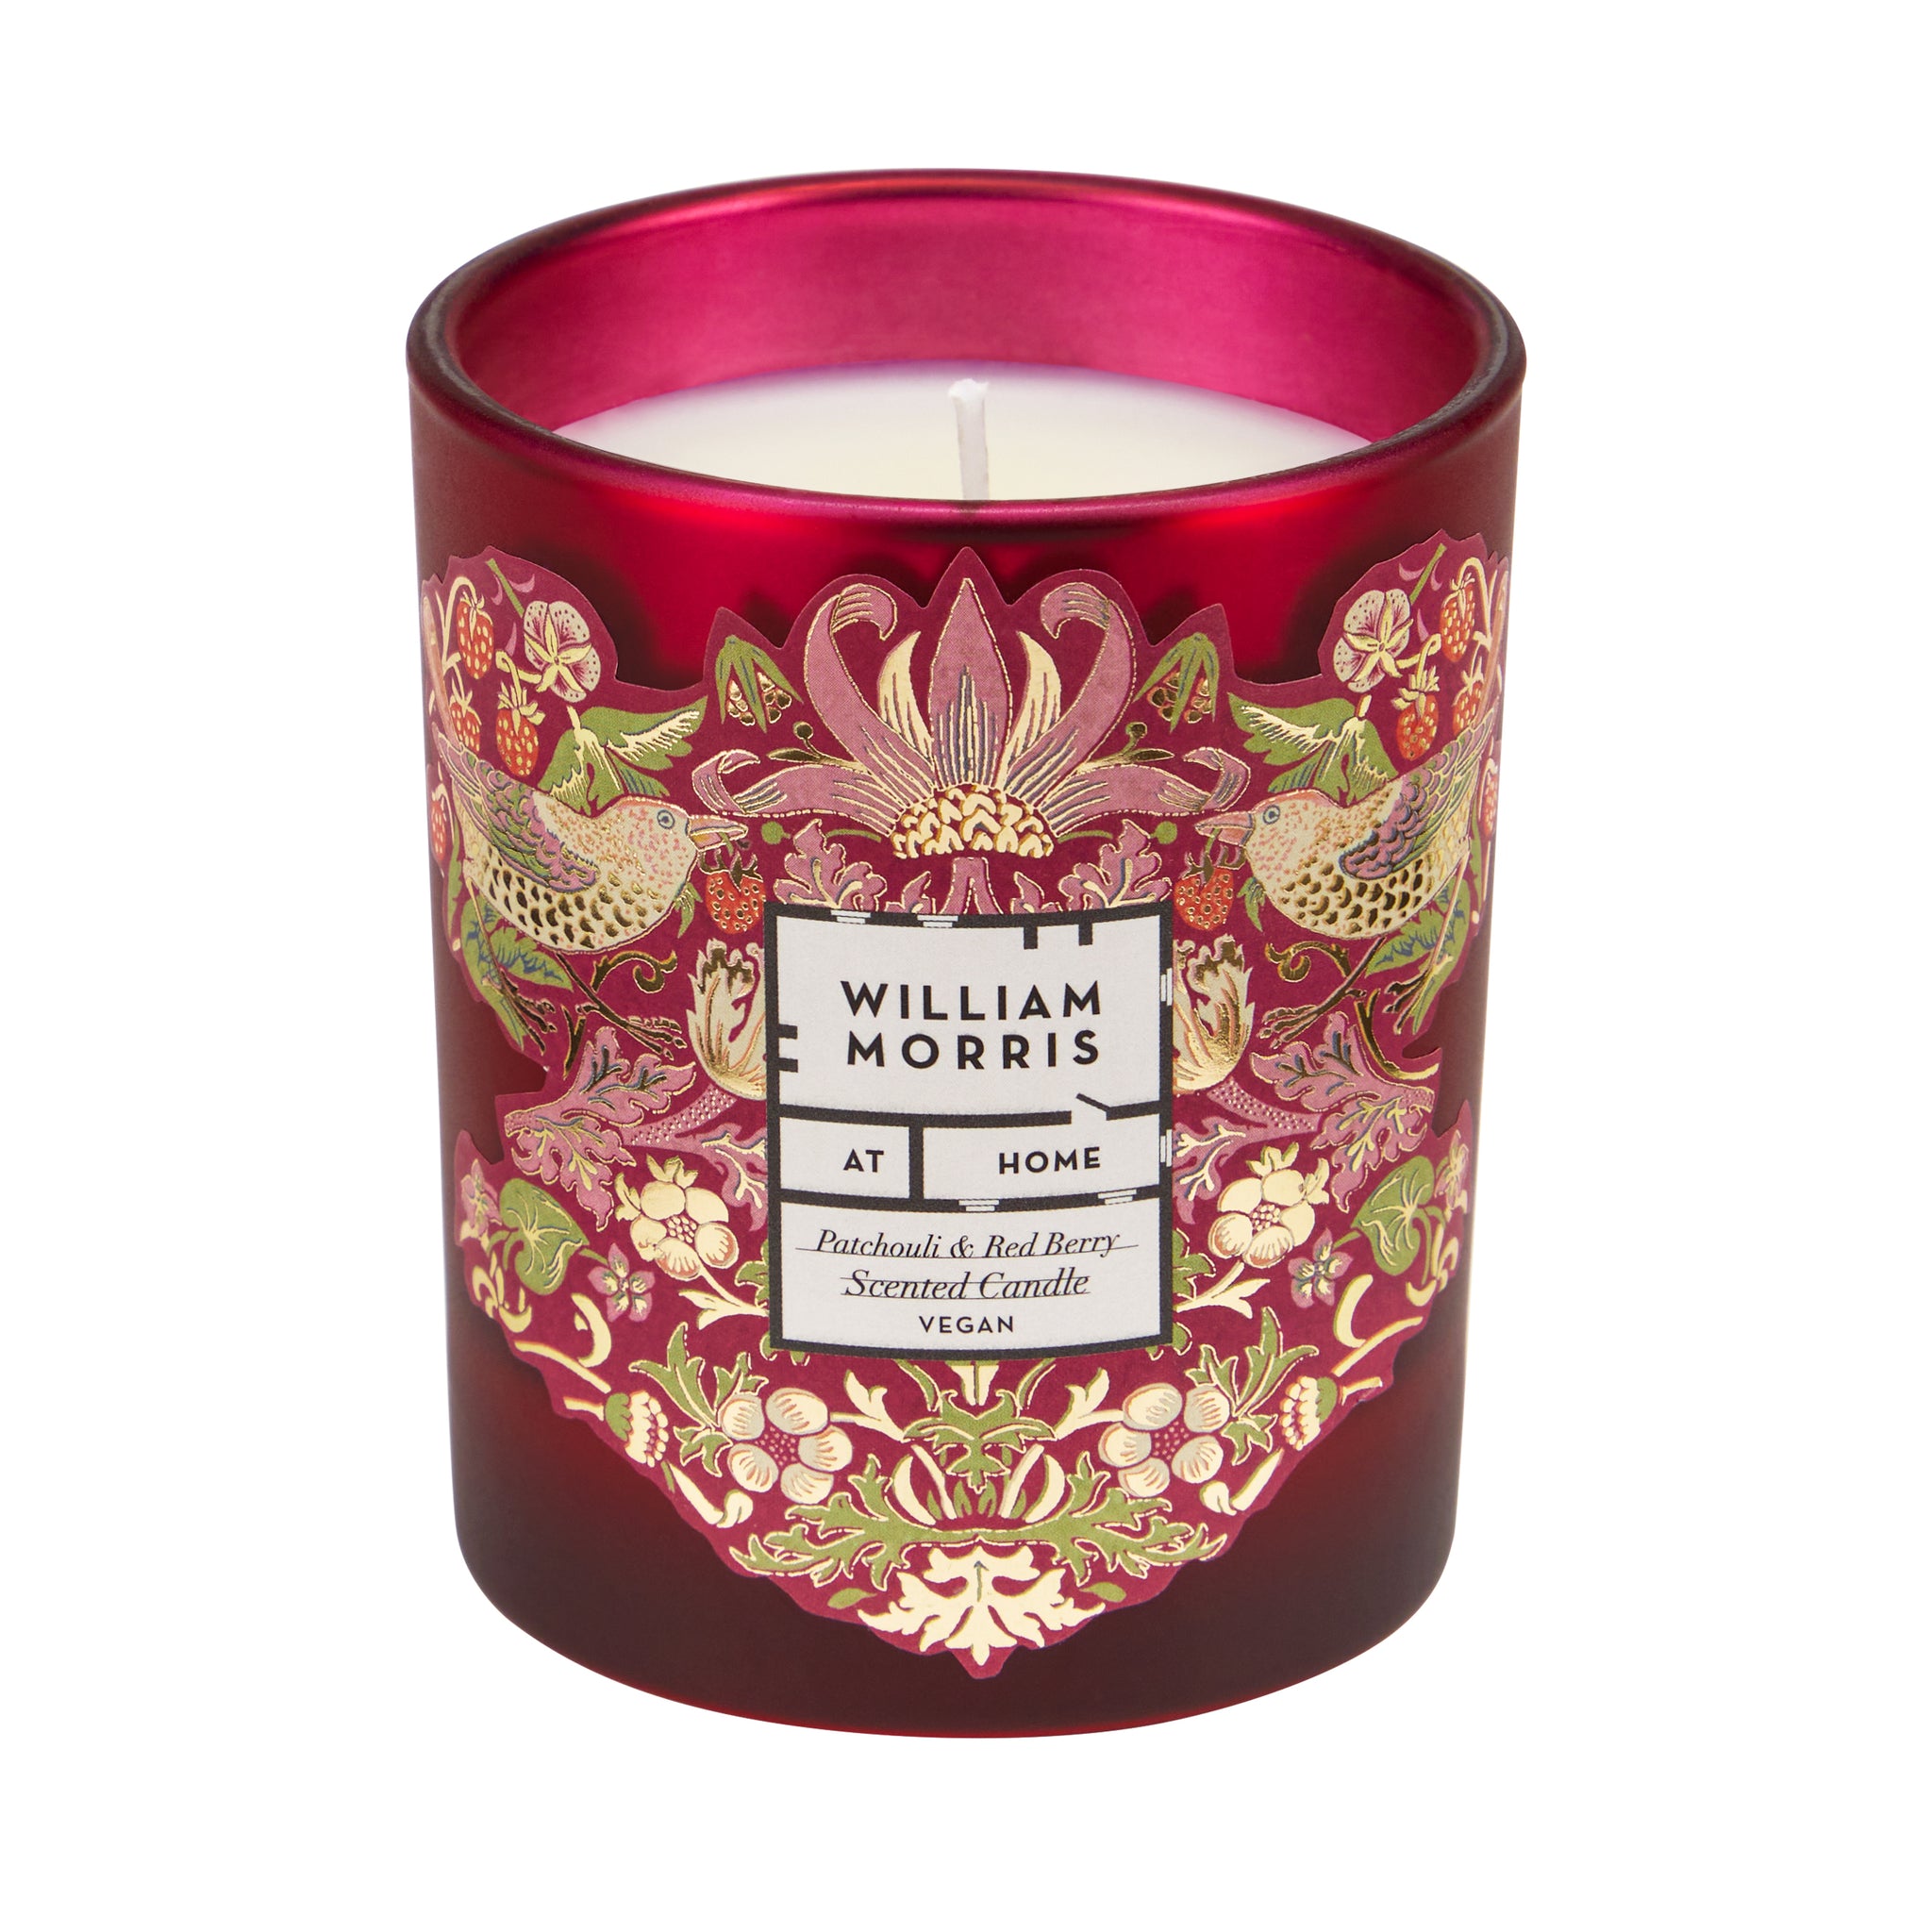 Morris Patchouli & Red Berry Scented Candle